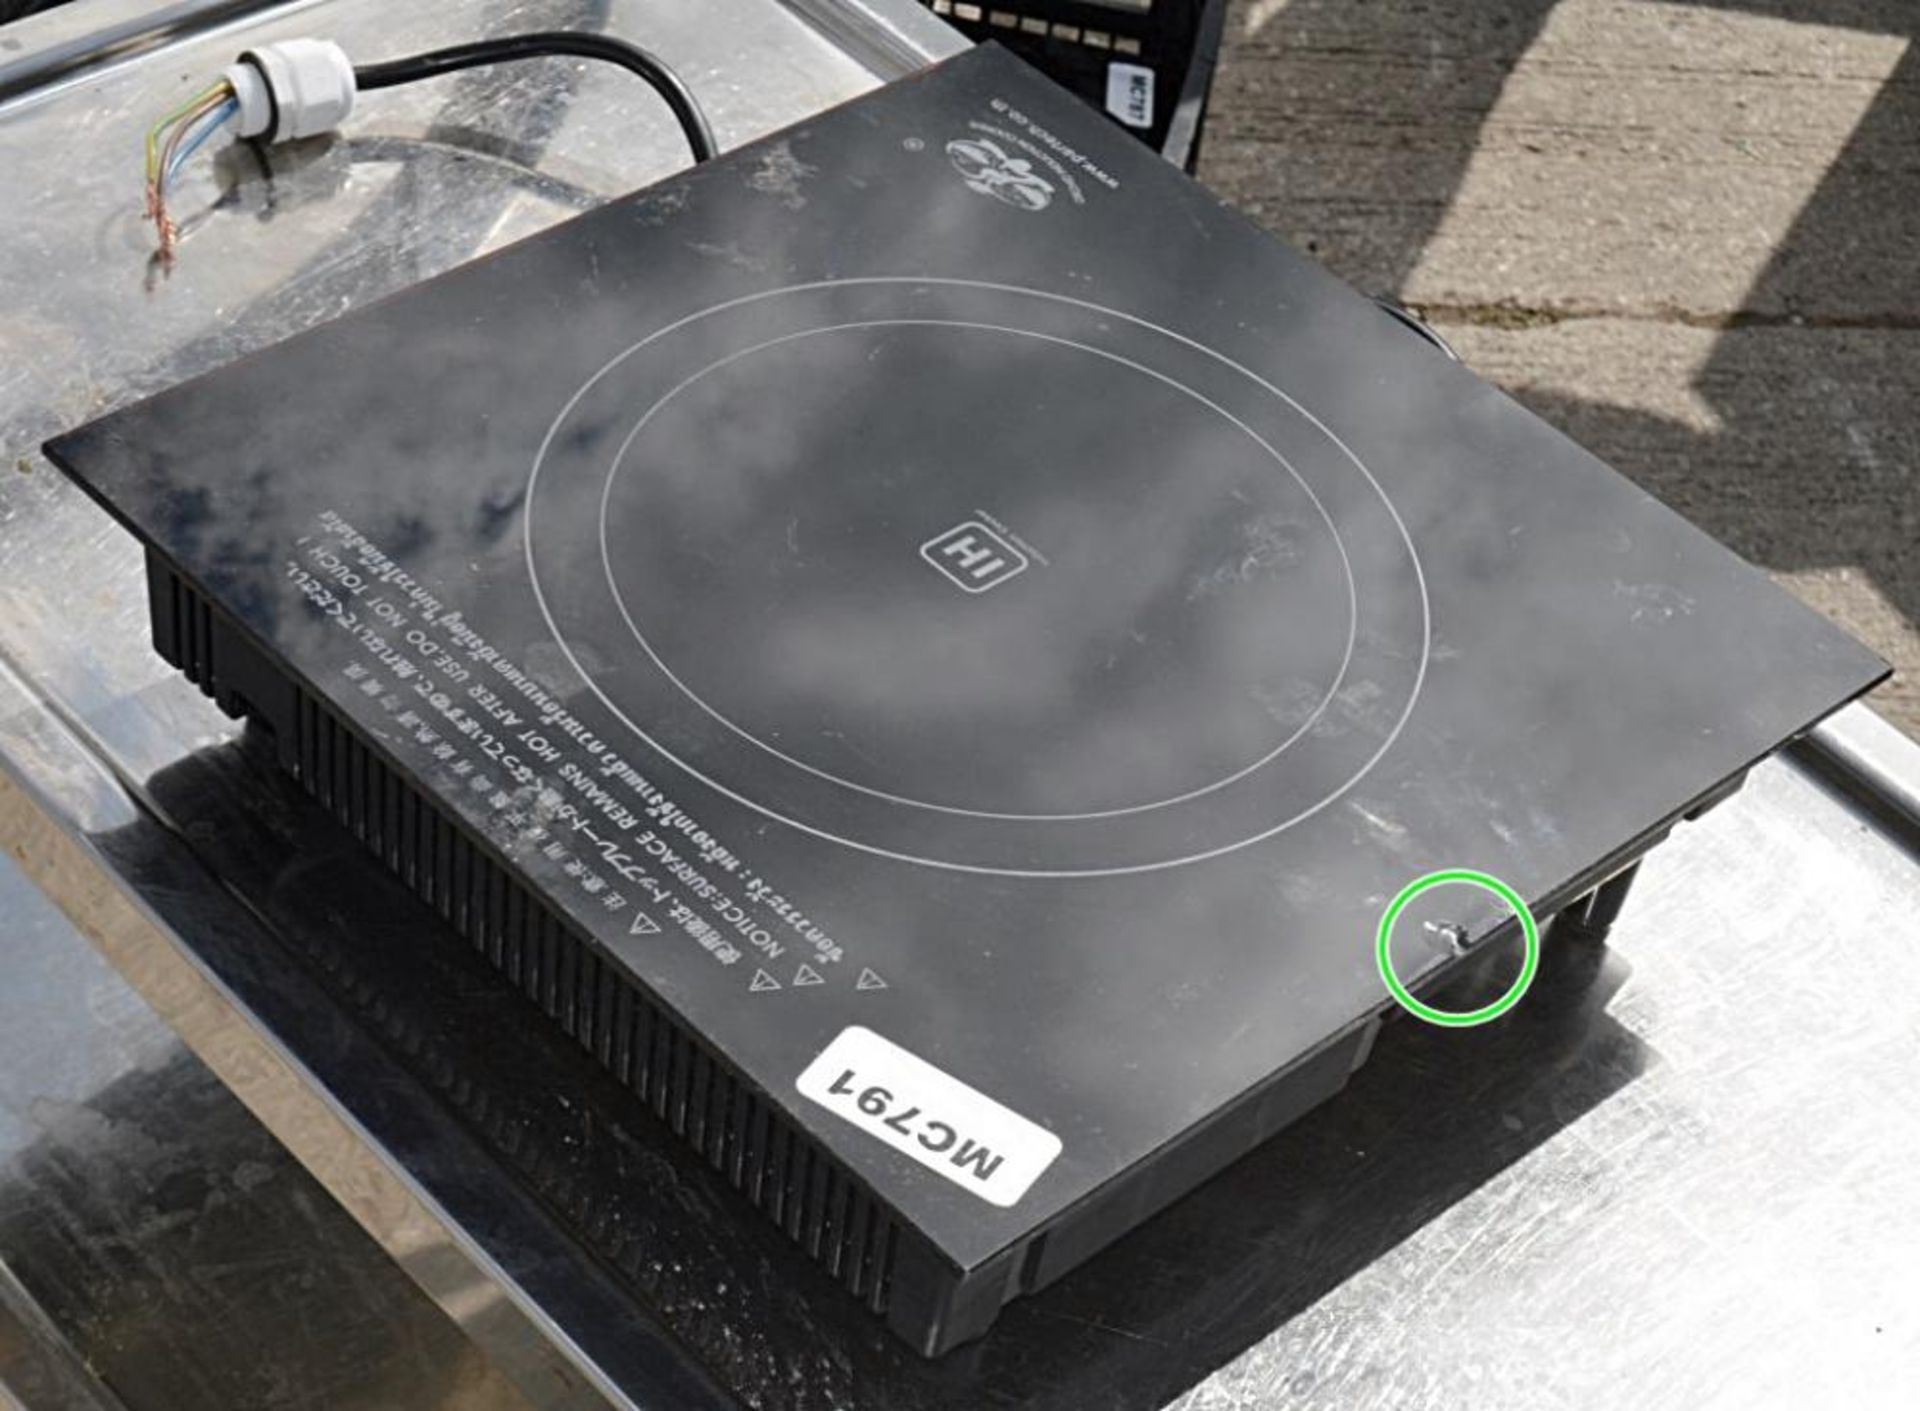 1 x Orchid IH-G1113A Induction Cooker - Pre-owned, Taken From An Asian Fusion Restaurant - Ref: MC79 - Image 4 of 4